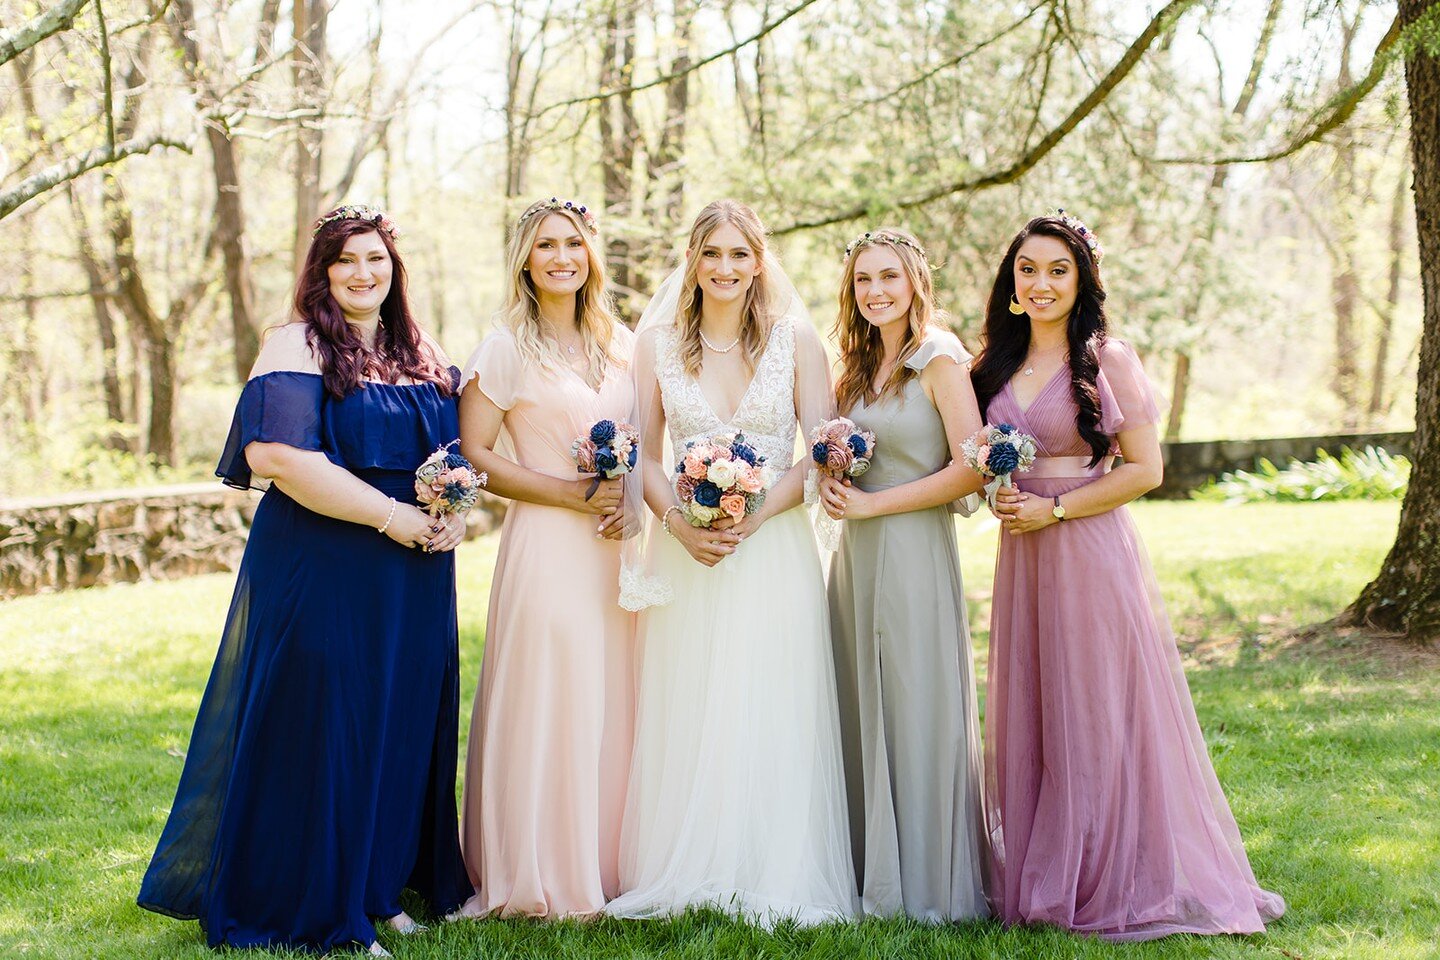 Janet and her beautiful bridal party | Love how they have different dresses yet everything comes together and looks goregous | Makeup by Sandra | #bridesmaidsinspiration 
Venue @rustmanorhouse 
Photo @meganreiphotography